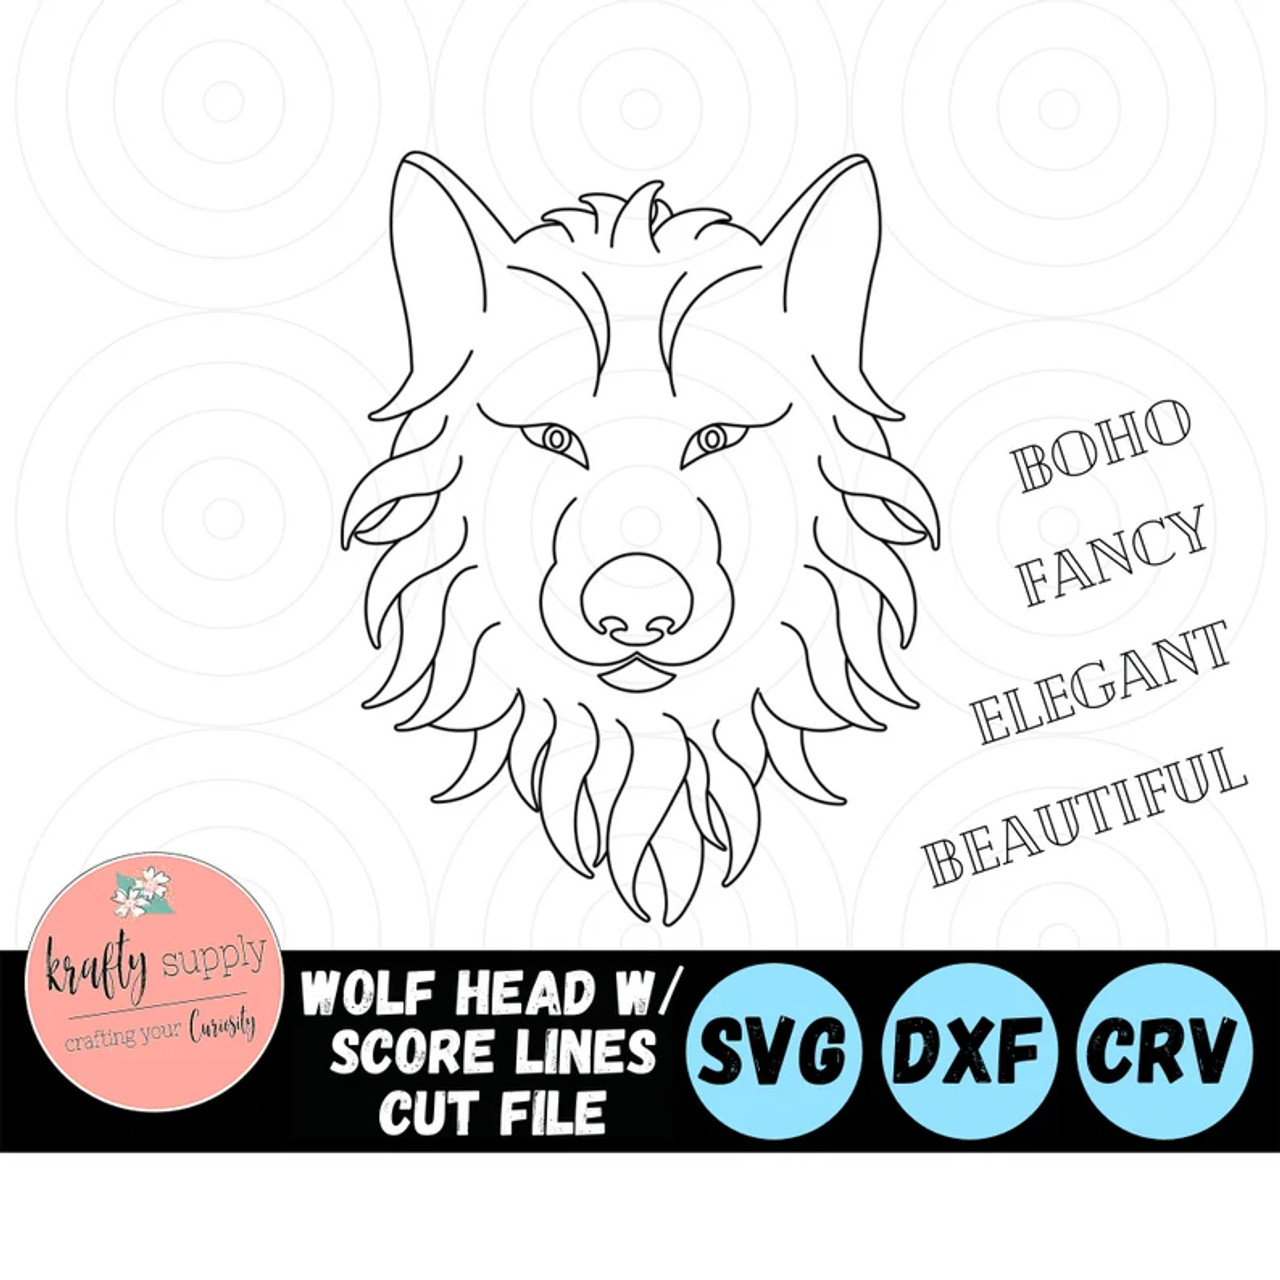 Howling Wolf SVG Vector Clipart Design Silhouette For Vinyl Decal Sticker